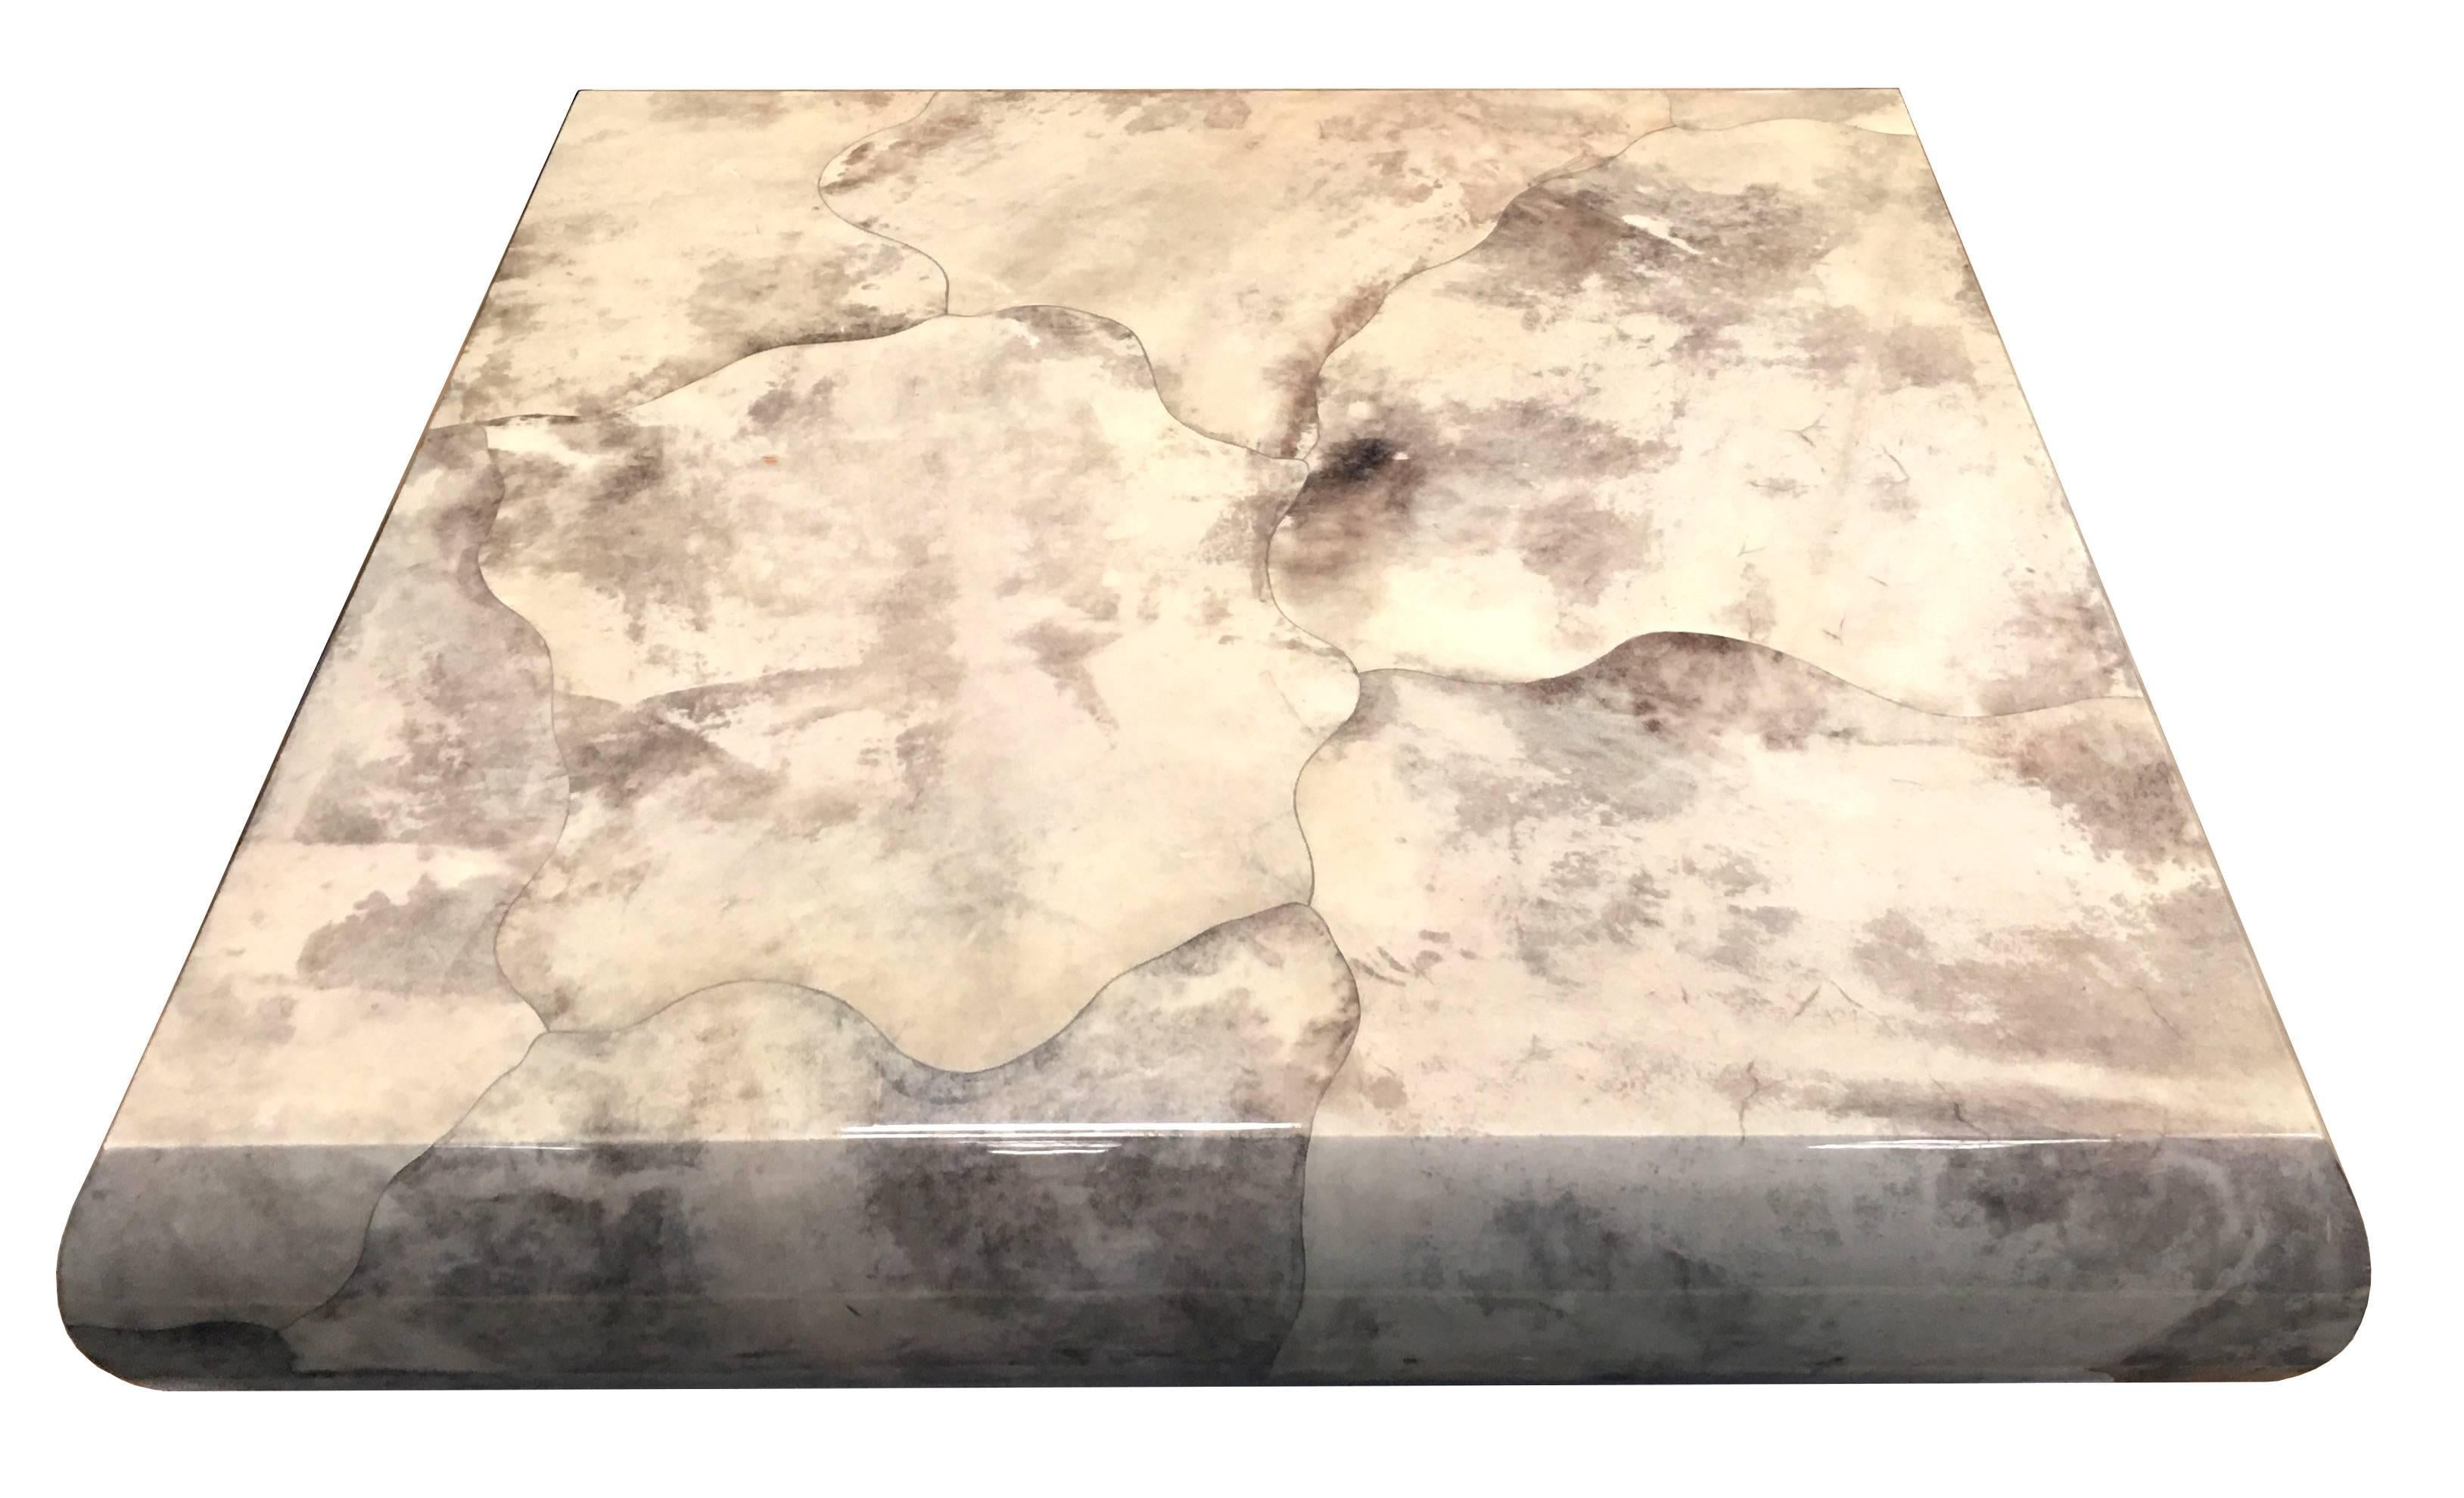 Monumental Karl Springer custom free-form pattern goatskin coffee table. The fantastically figured top is raised on a mirror polished stainless steel clad base that reflects whatever it sits on making the base virtually disappear, giving the